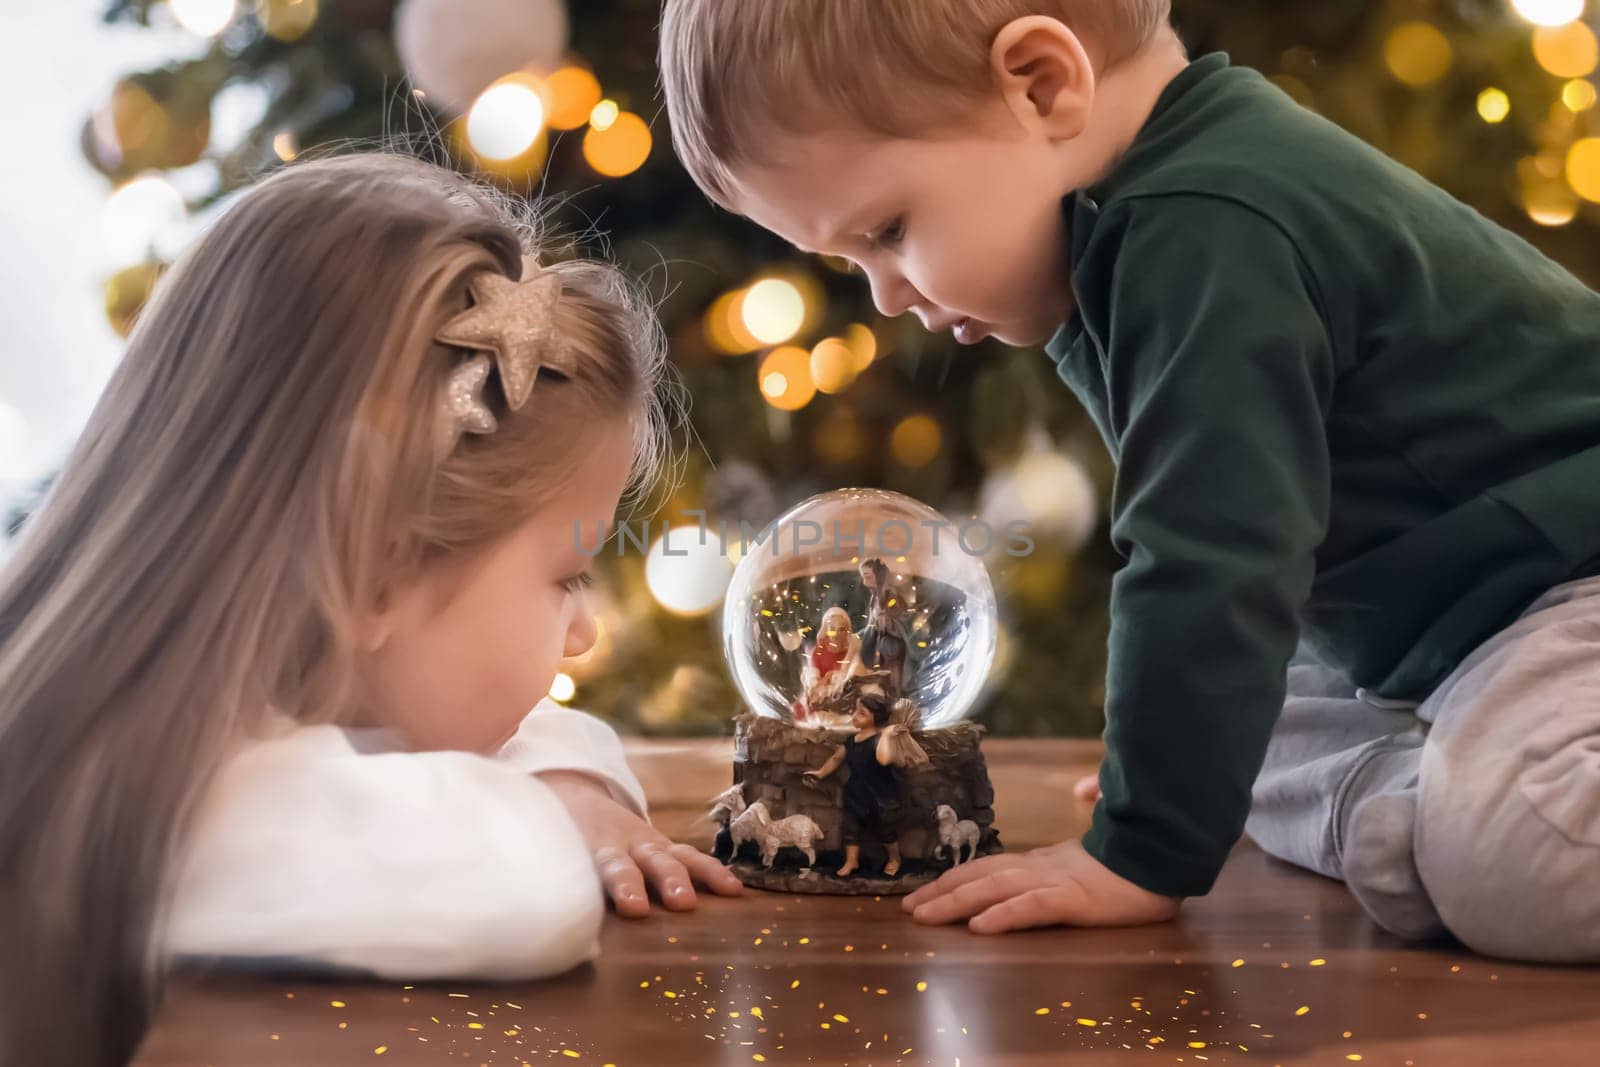 Sister and brother looking at a glass ball with a scene of the nativity of Jesus Christ in a glass ball